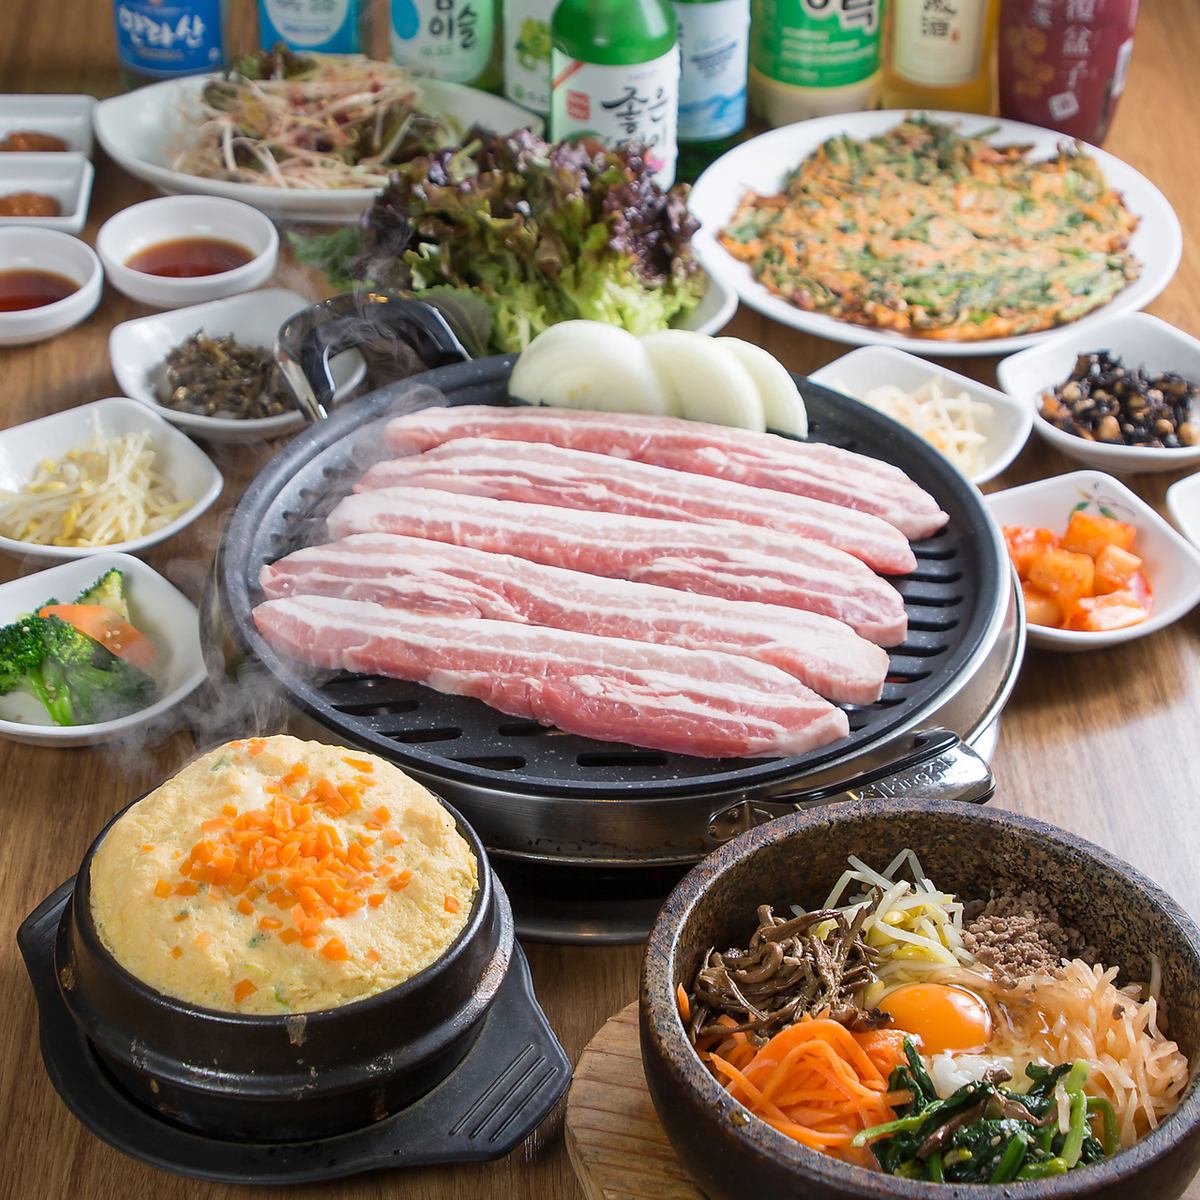 Hansong's authentic Korean food made by mom is full of exquisite dishes♪